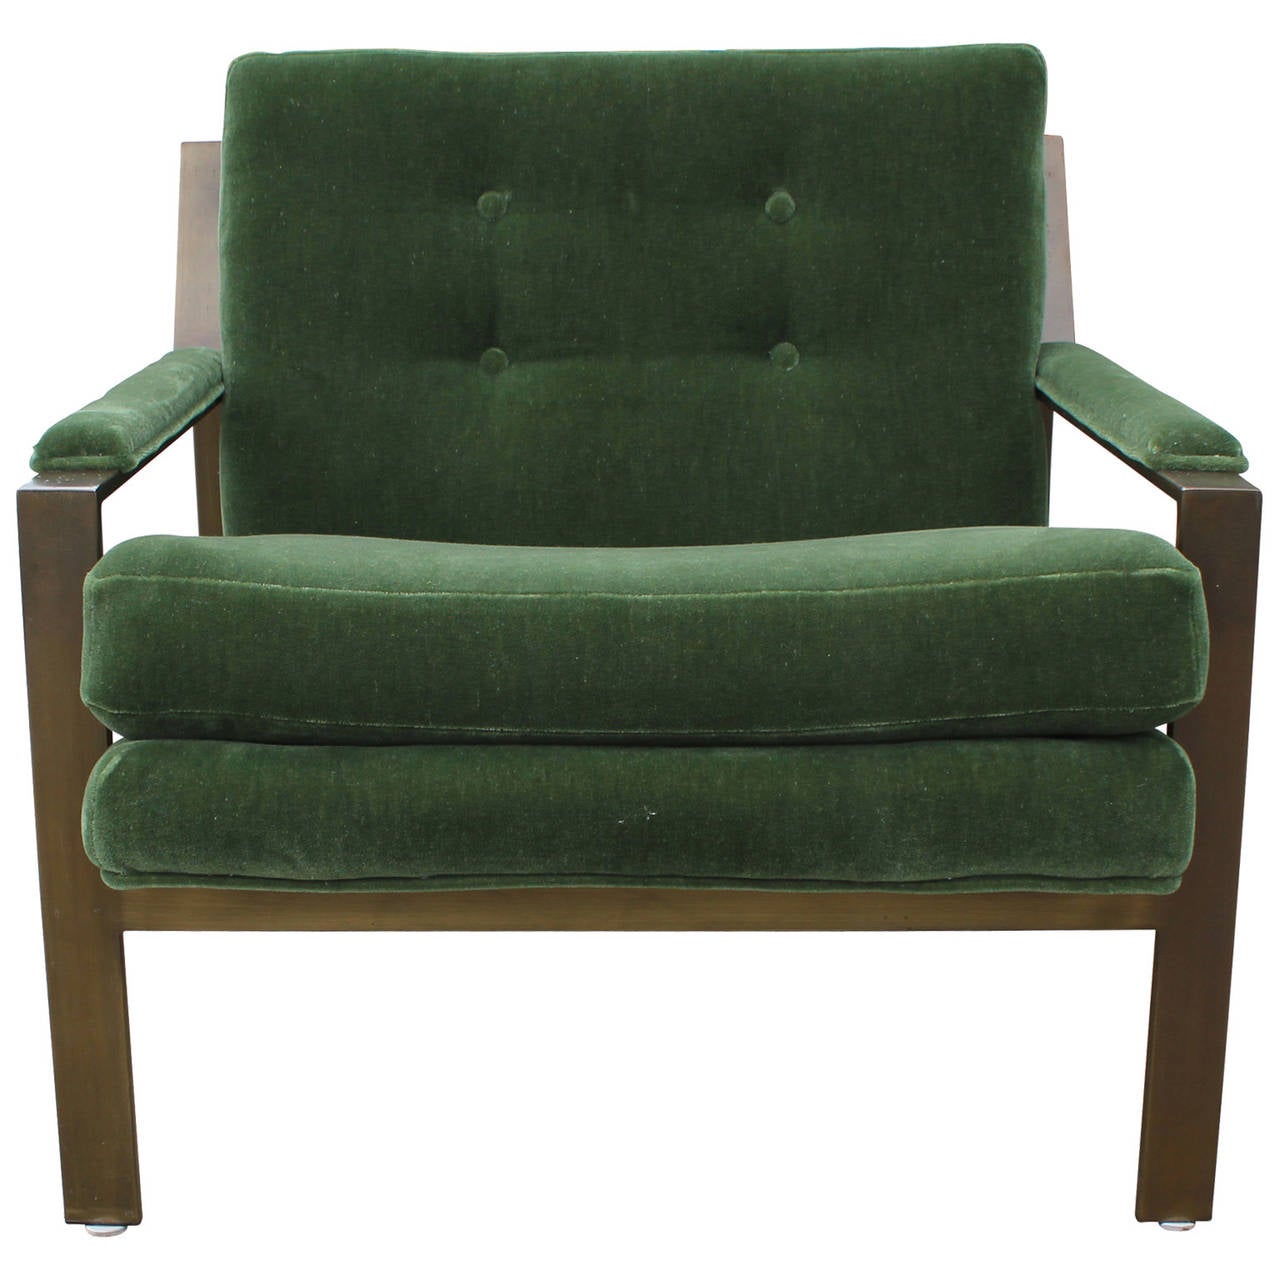 Pair of sculptural lounge chairs by Cy Mann in the style of Milo Baughman. Chairs are made of heavy bronze and have been reupholstered in green mohair velvet.